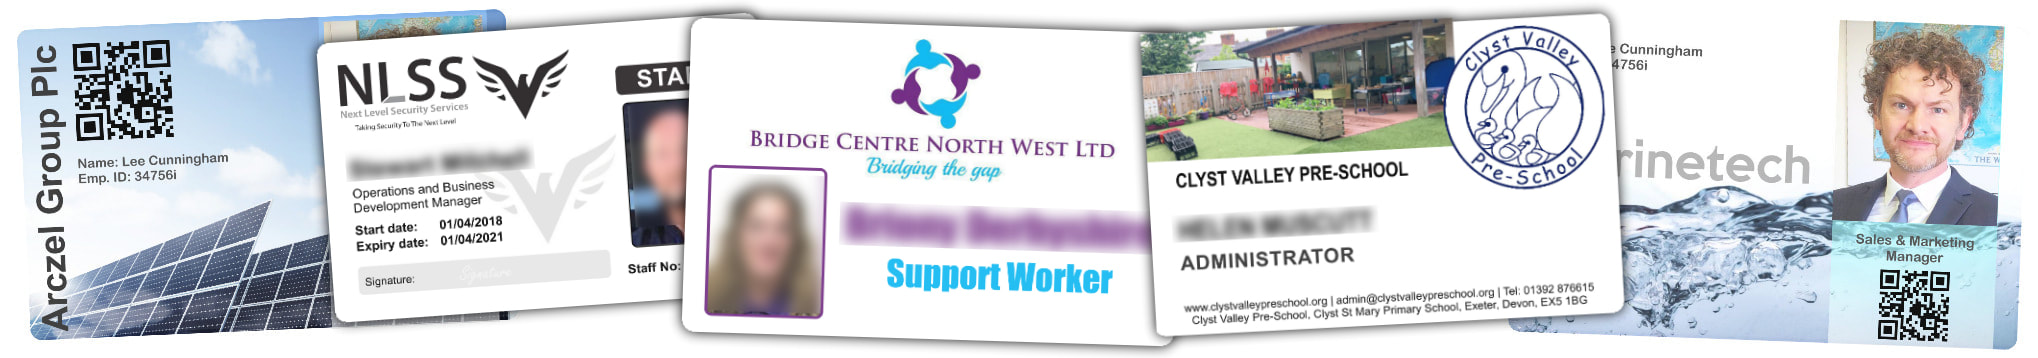 Luton examples of staff photo ID cards | samples of employee Identity card printing | Workers ID cards printed in Bedforshire